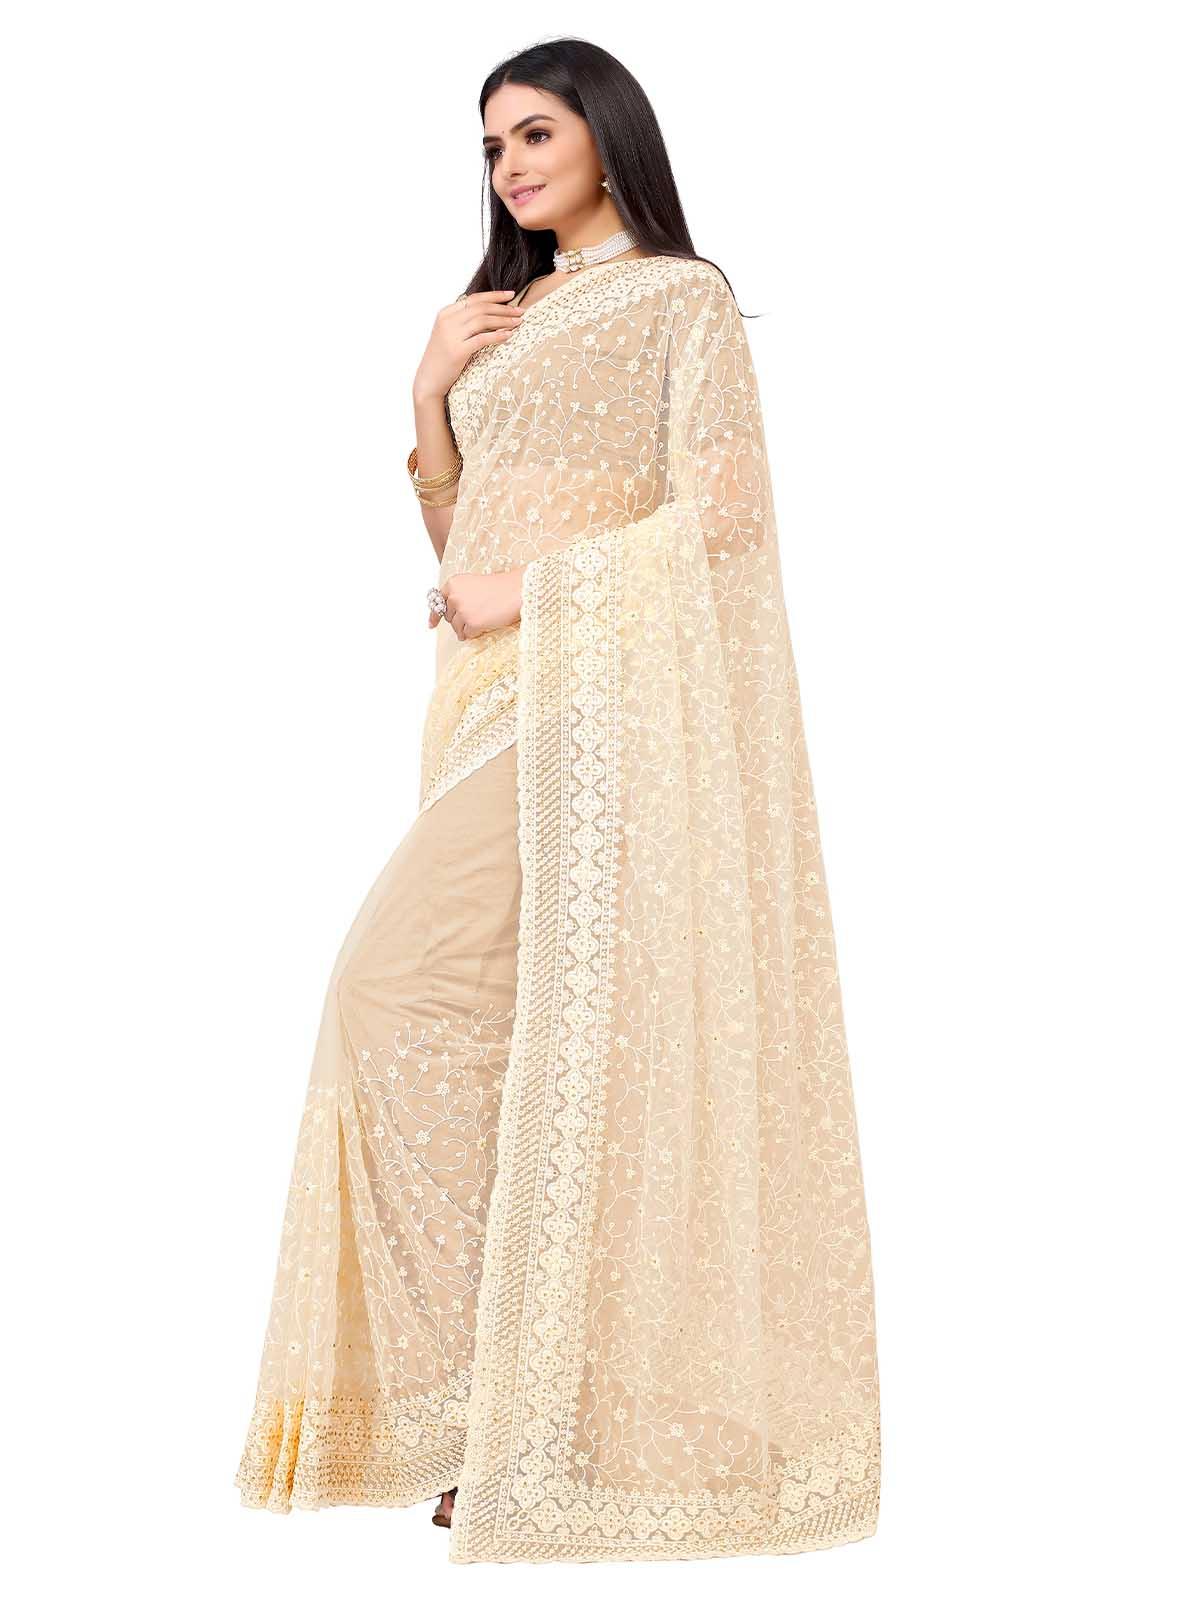 Women's Apricot Net Embroidered Saree With Blouse - Odette